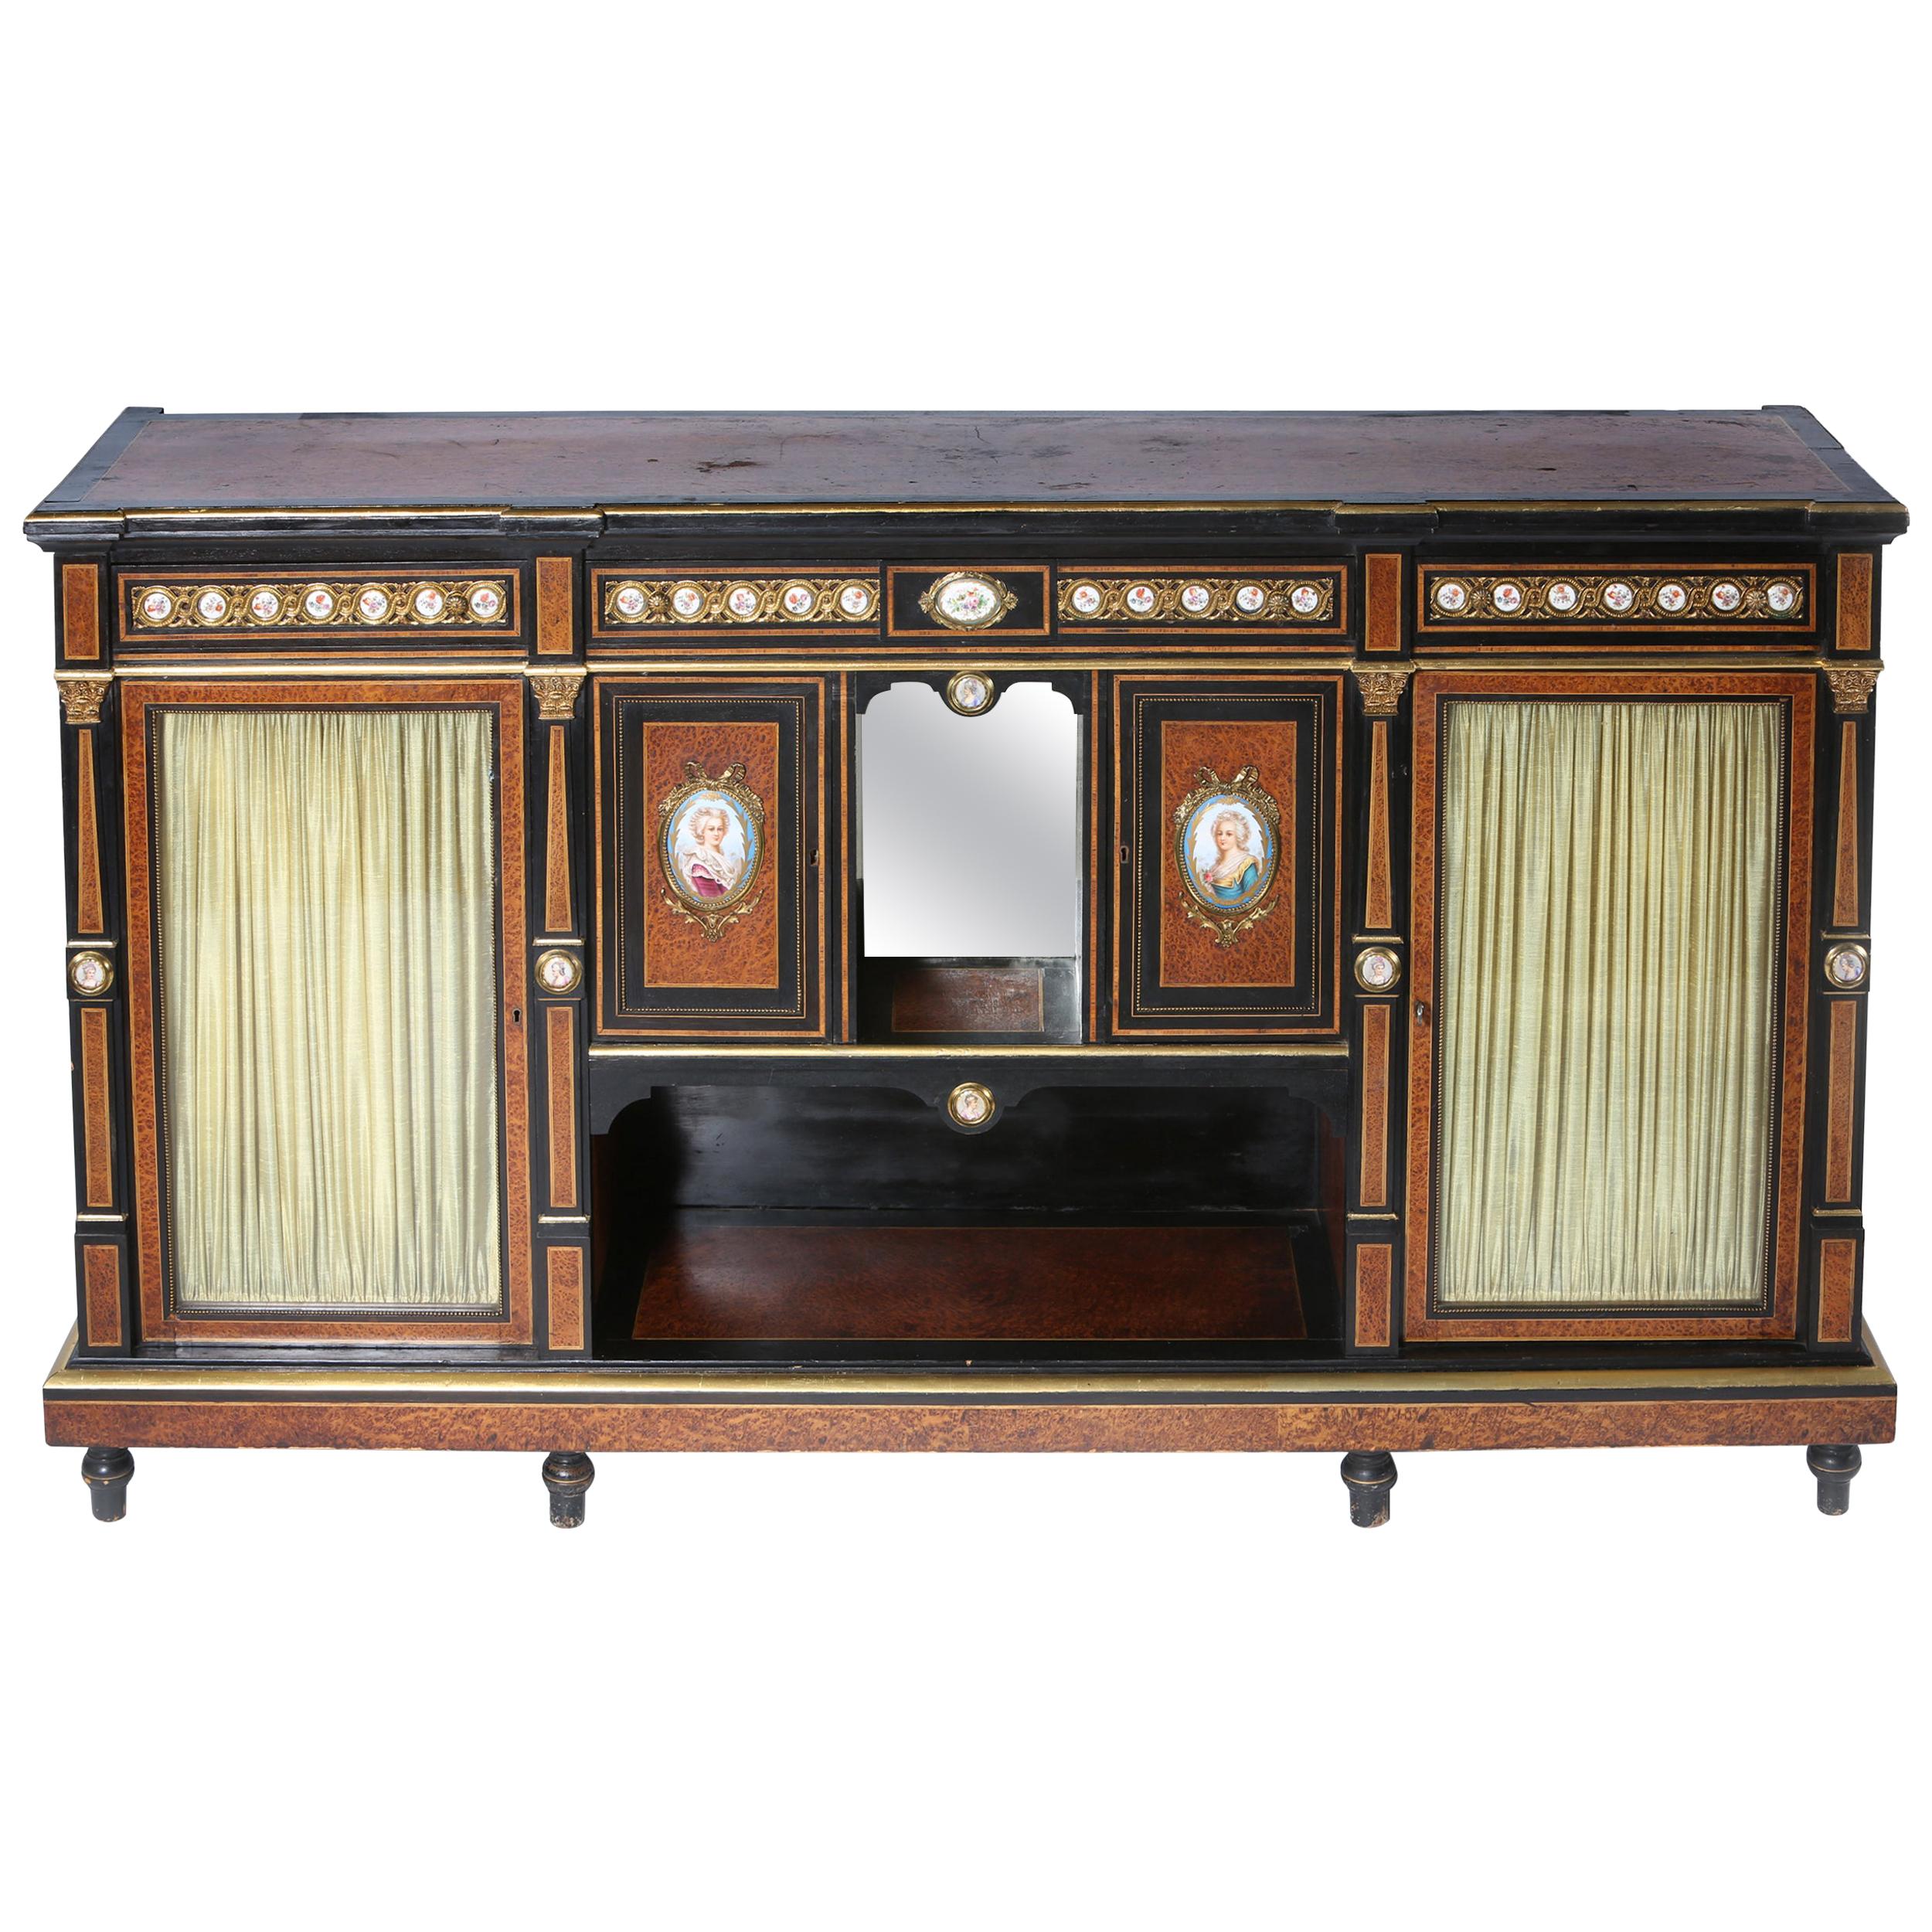 Early 19th Century Louis XVI Style Sideboard / Cabinet